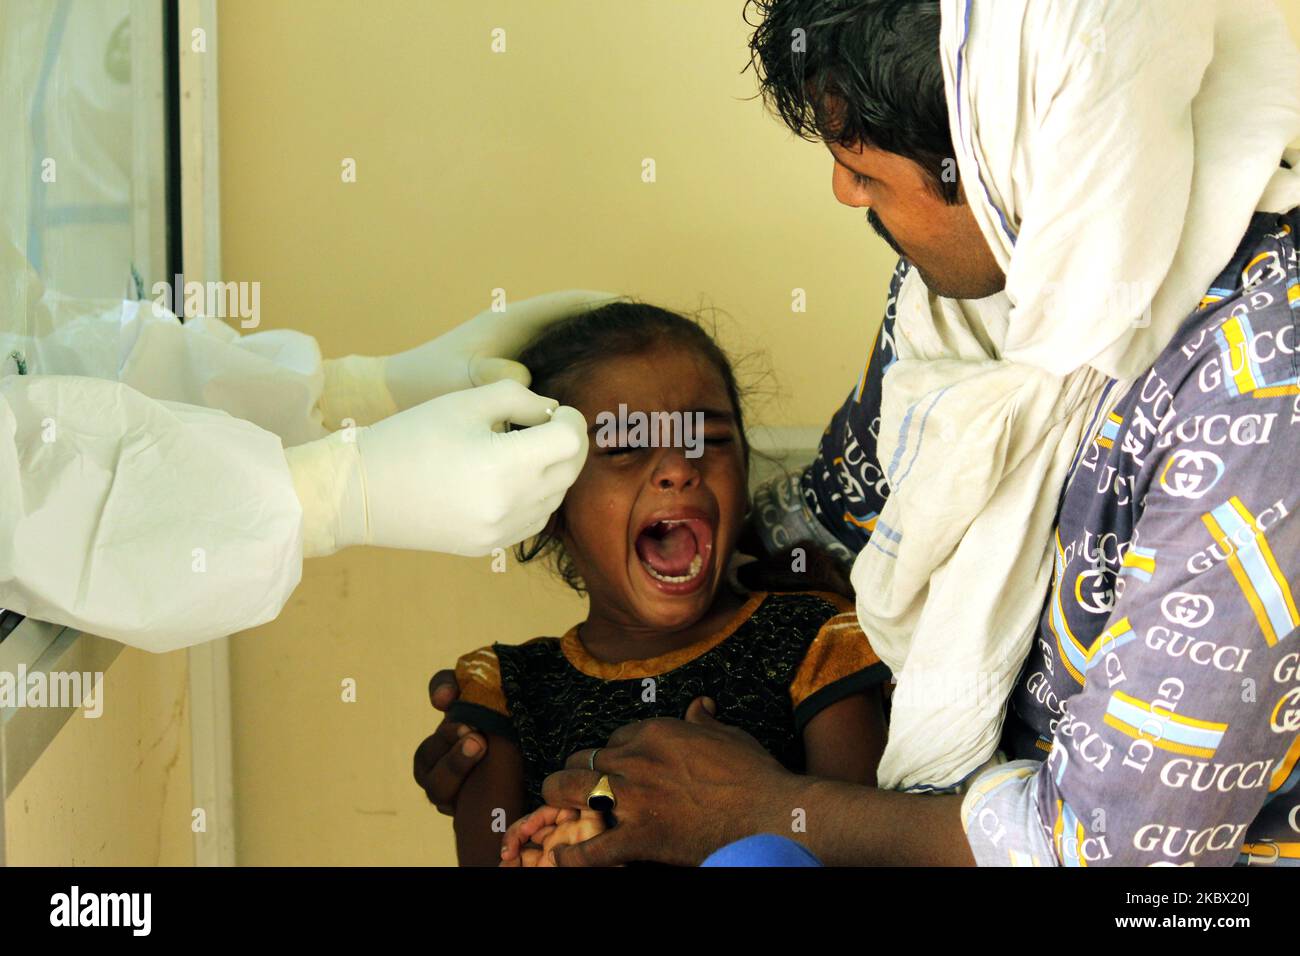 A medical staff collects a sample from a child for Rapid Antigen Test (RAT) for the COVID-19 coronavirus at Chacha Nehru Bal Chikitsalaya near Geeta Colony in New Delhi on August 11, 2020. For the past seven days, India's single-day count of Covid-19 cases has been more than that of the US and Brazil, the two worst-hit nations in terms of infections, according to an analysis of WHO data. India, the third worst-hit nation in terms of infections, has also accounted for over 23 per cent of the cases and more than 15 per cent of the deaths reported Stock Photo